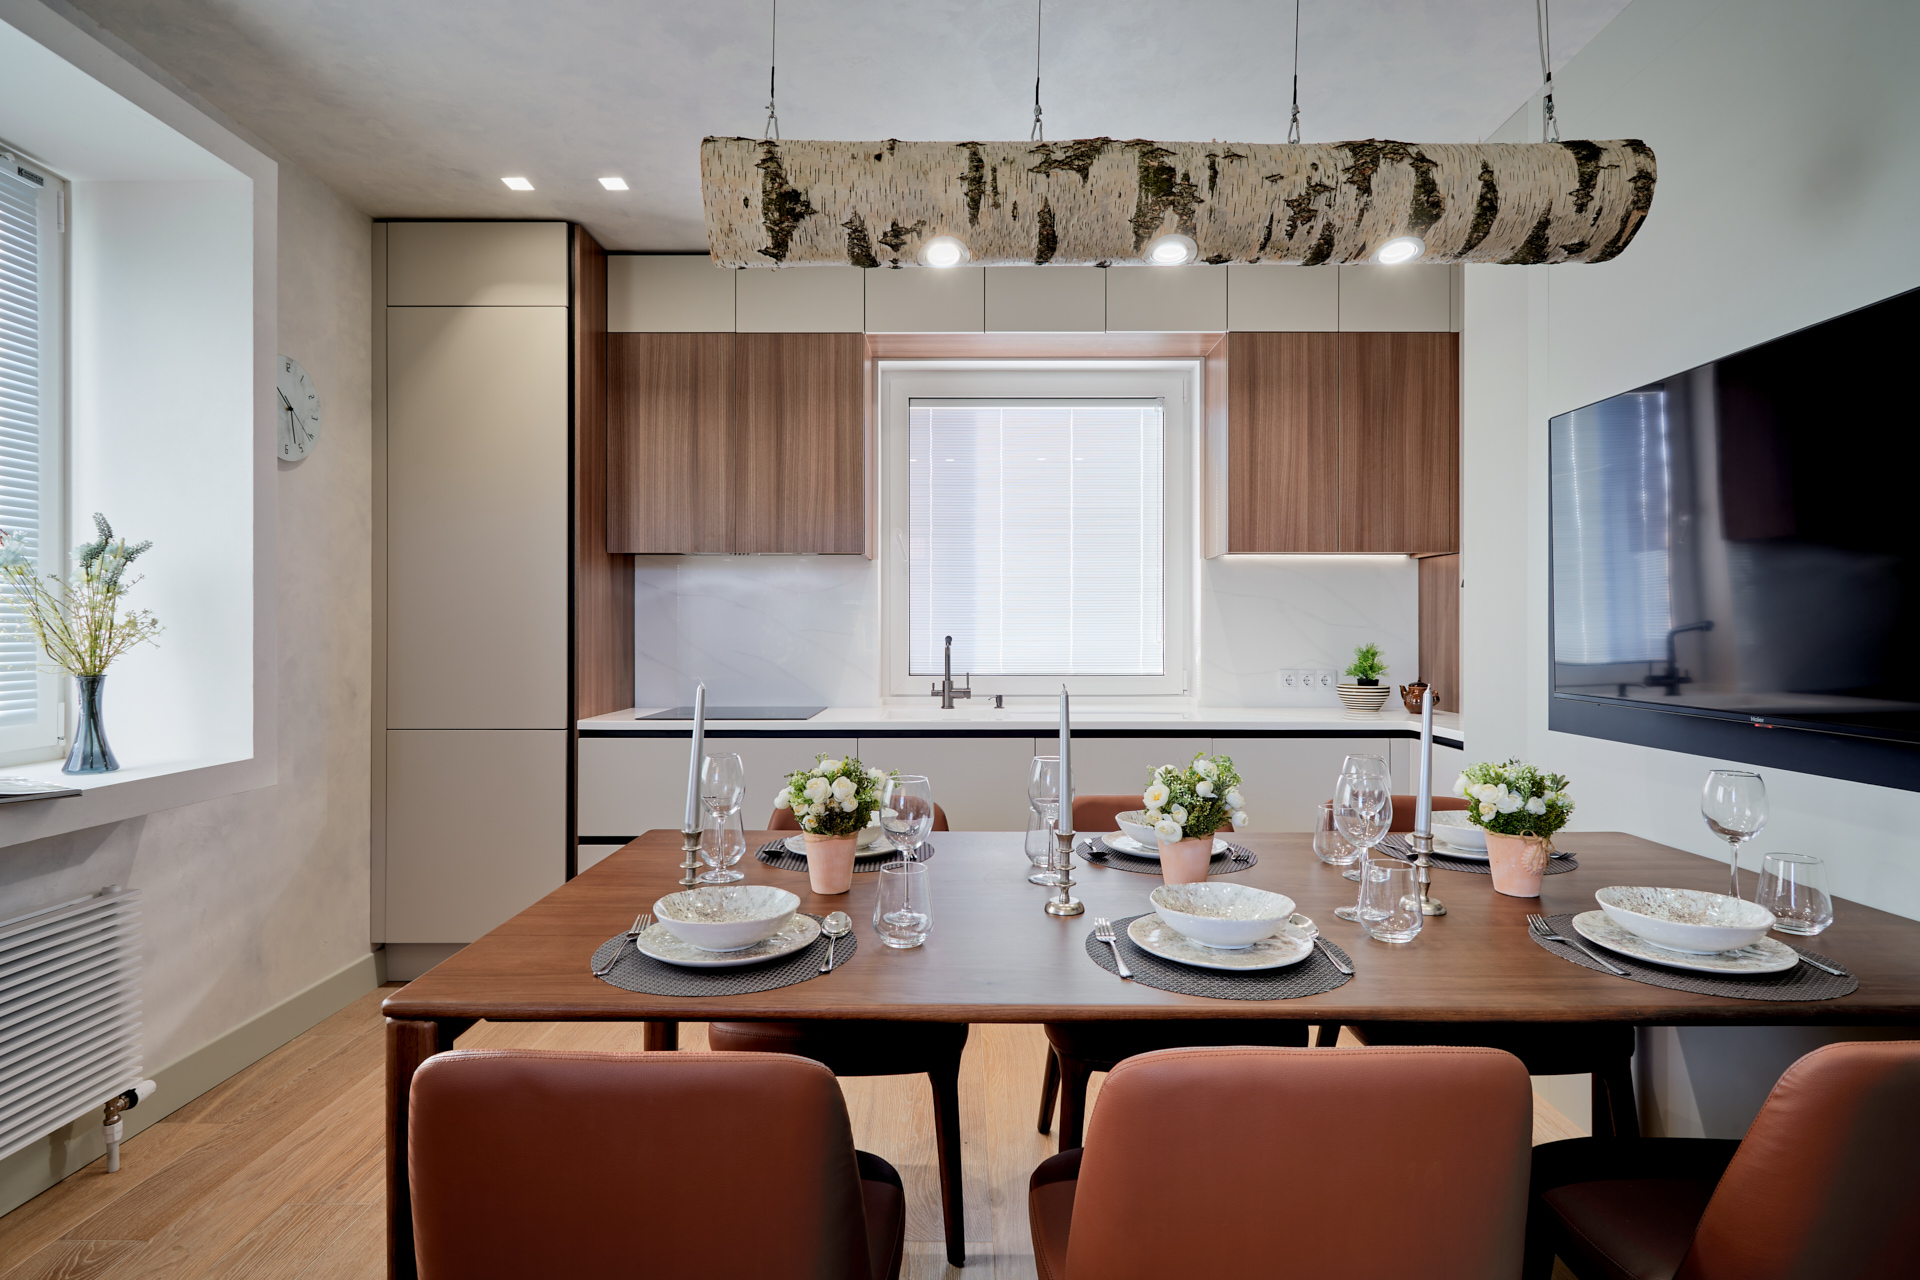 Lamarty in "Noce Mondiale" decor and SyPly plywood in "Dachny Otvet" project on NTV. Kitchen in a birch grove.